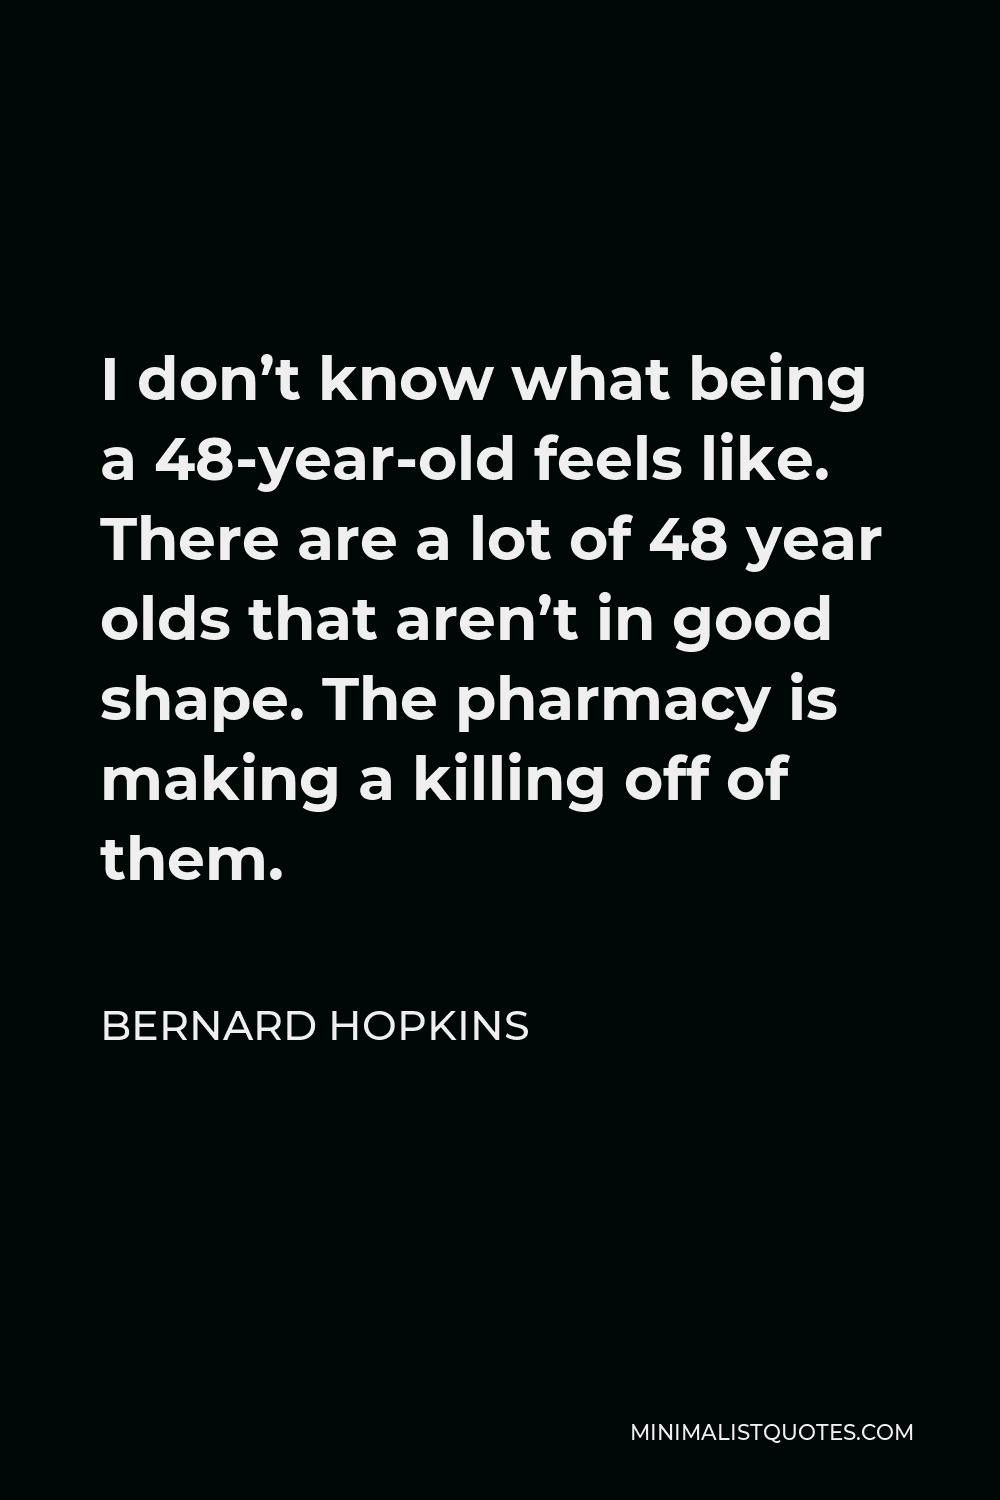 Bernard Hopkins Quote - I don’t know what being a 48-year-old feels like. There are a lot of 48 year olds that aren’t in good shape. The pharmacy is making a killing off of them.